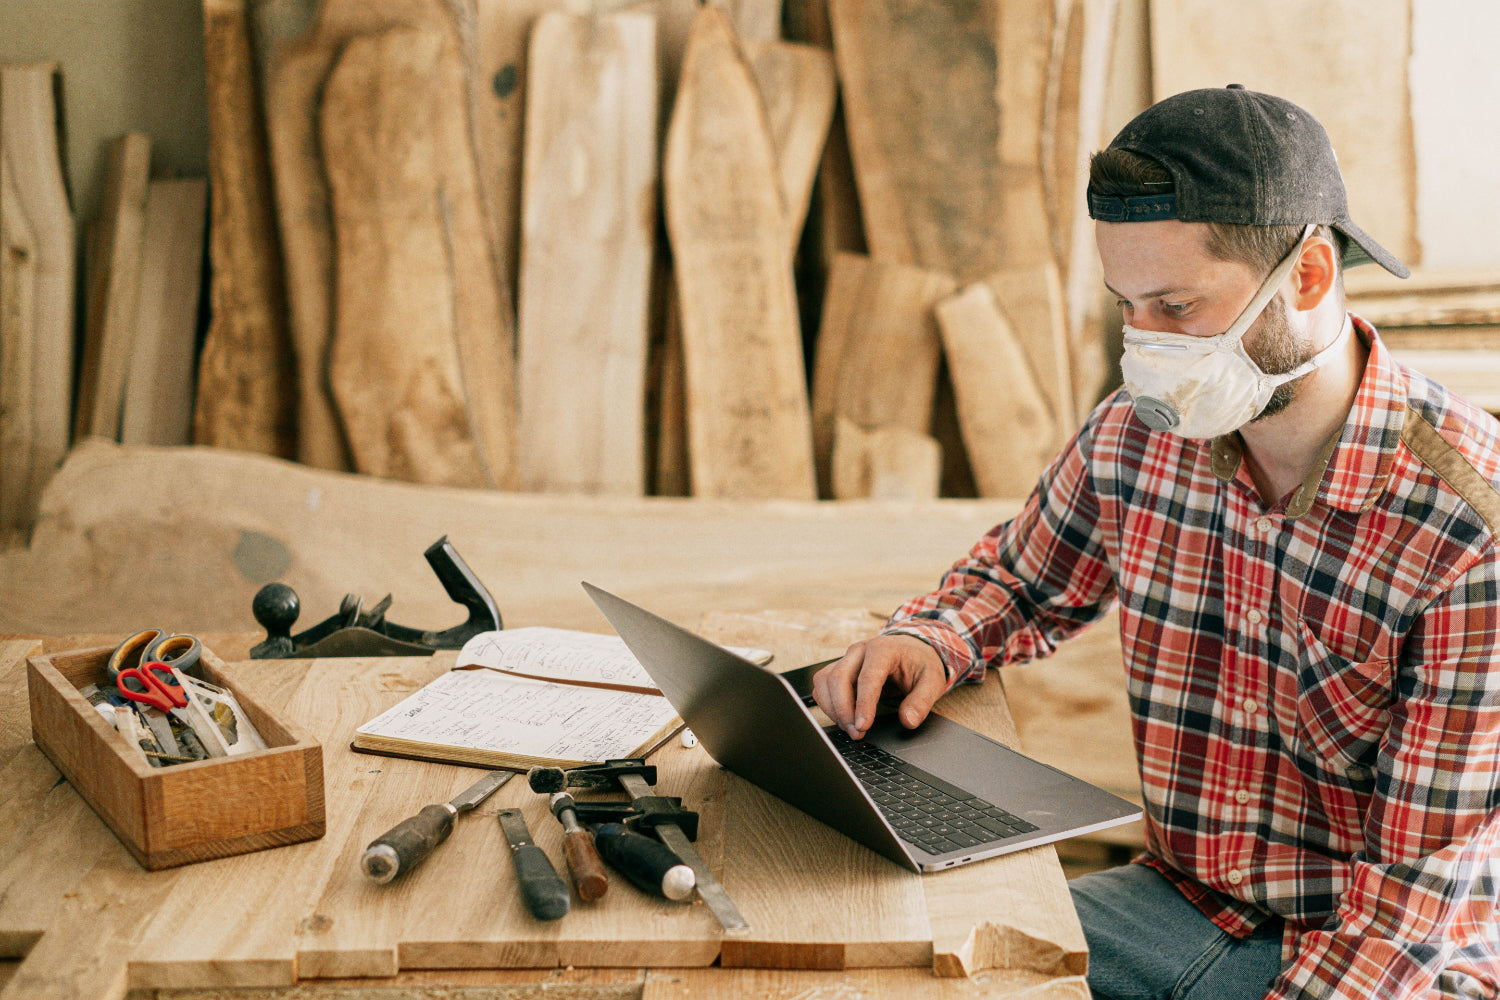 A person types on a laptop in a woodworking shop setting